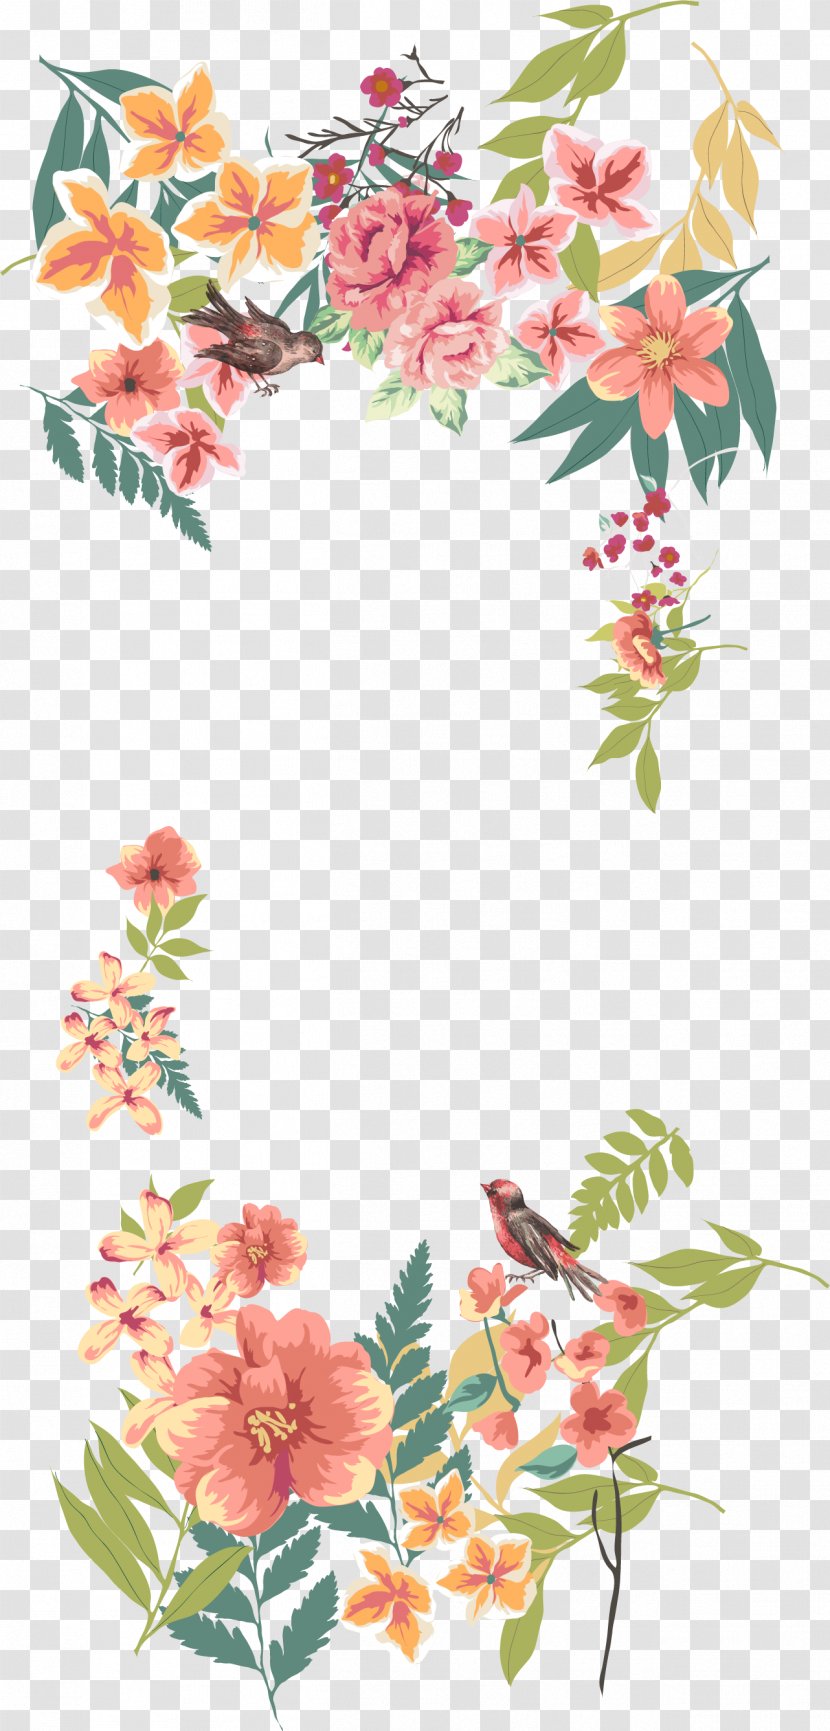 Flower Euclidean Vector Floral Design - If We - Hand Painted Borders Transparent PNG